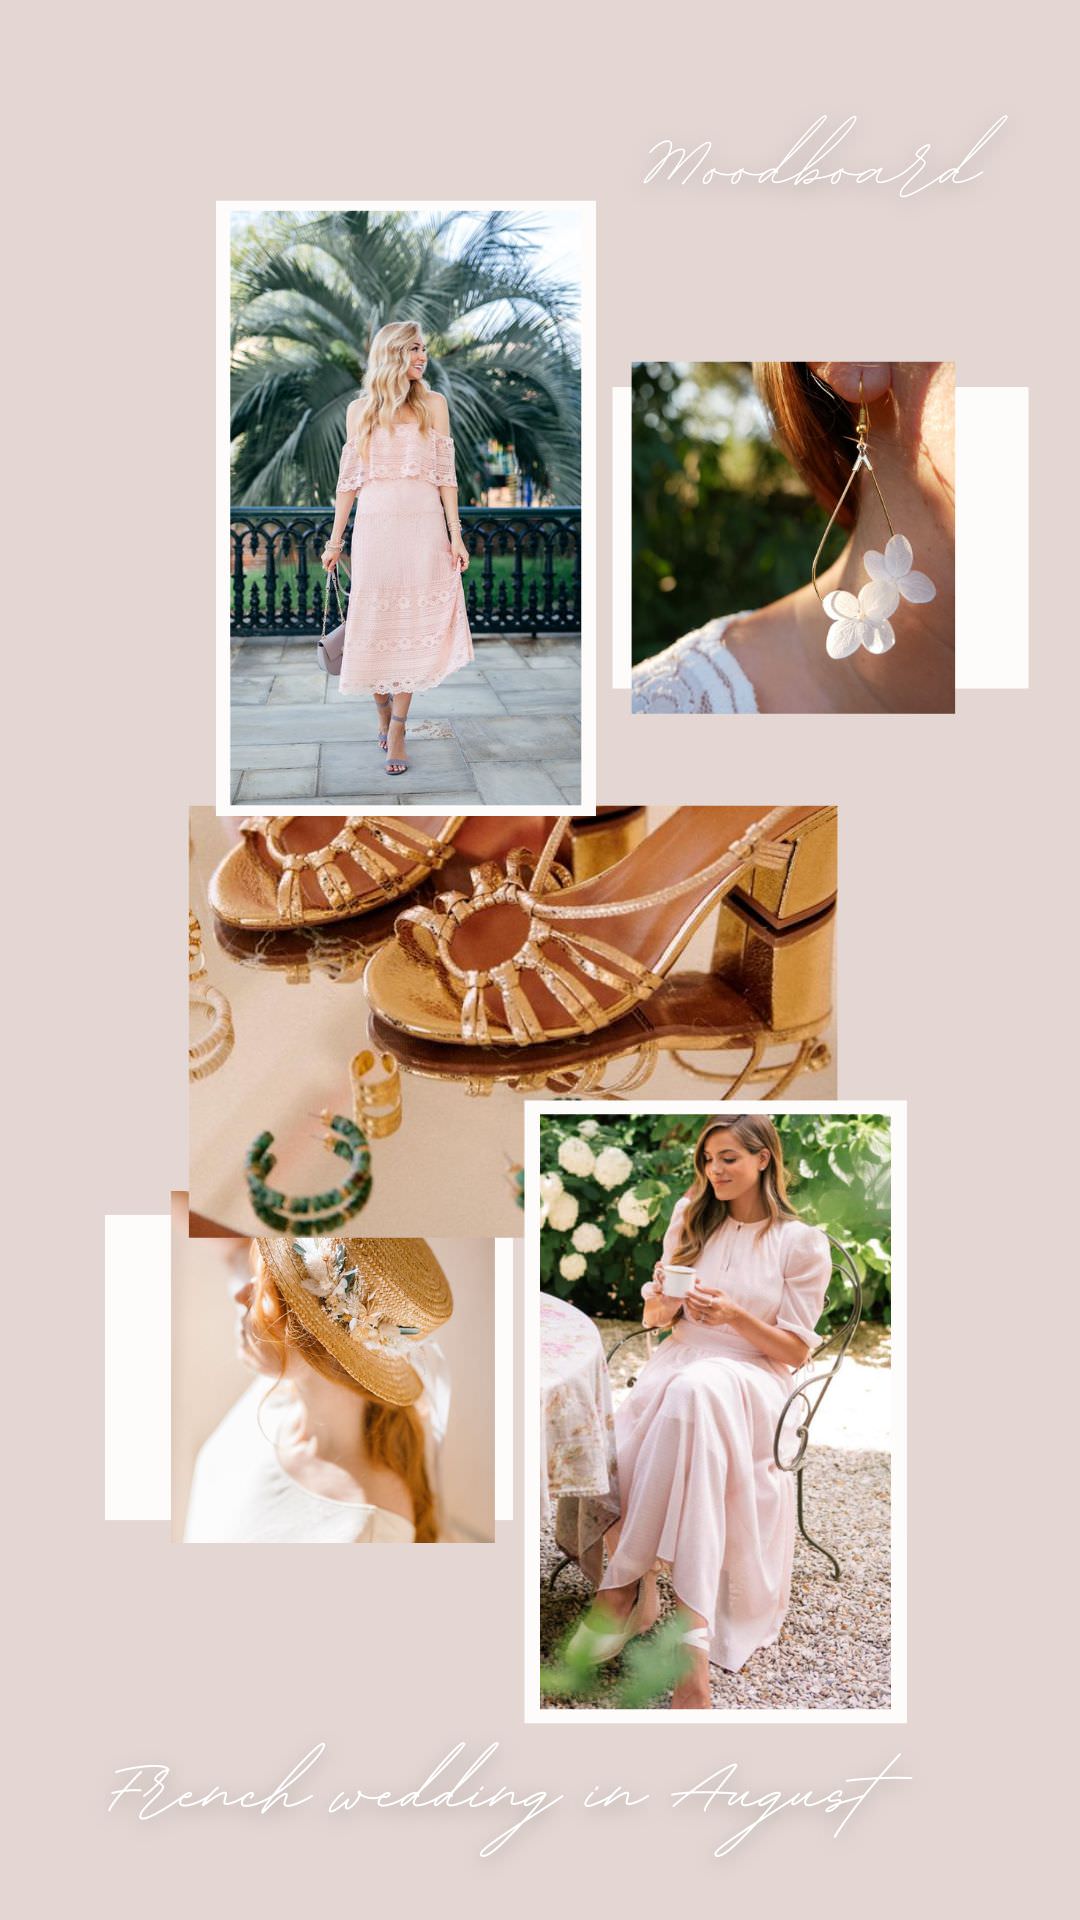 August wedding outfit inspiration for France